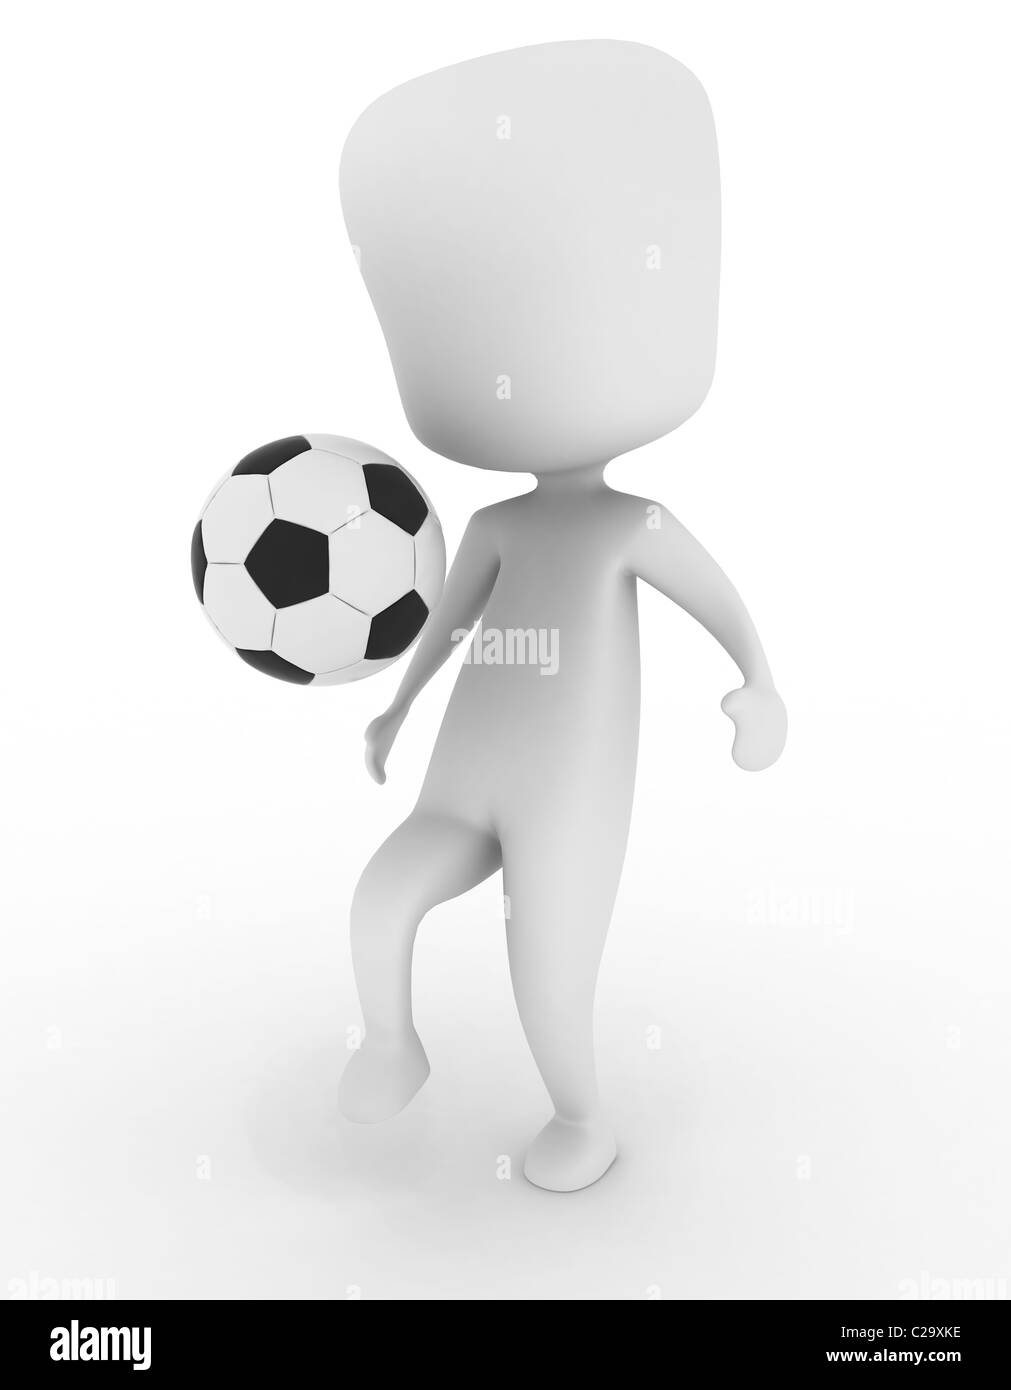 3D Illustration of a Man Playing with a Soccer Ball Stock Photo